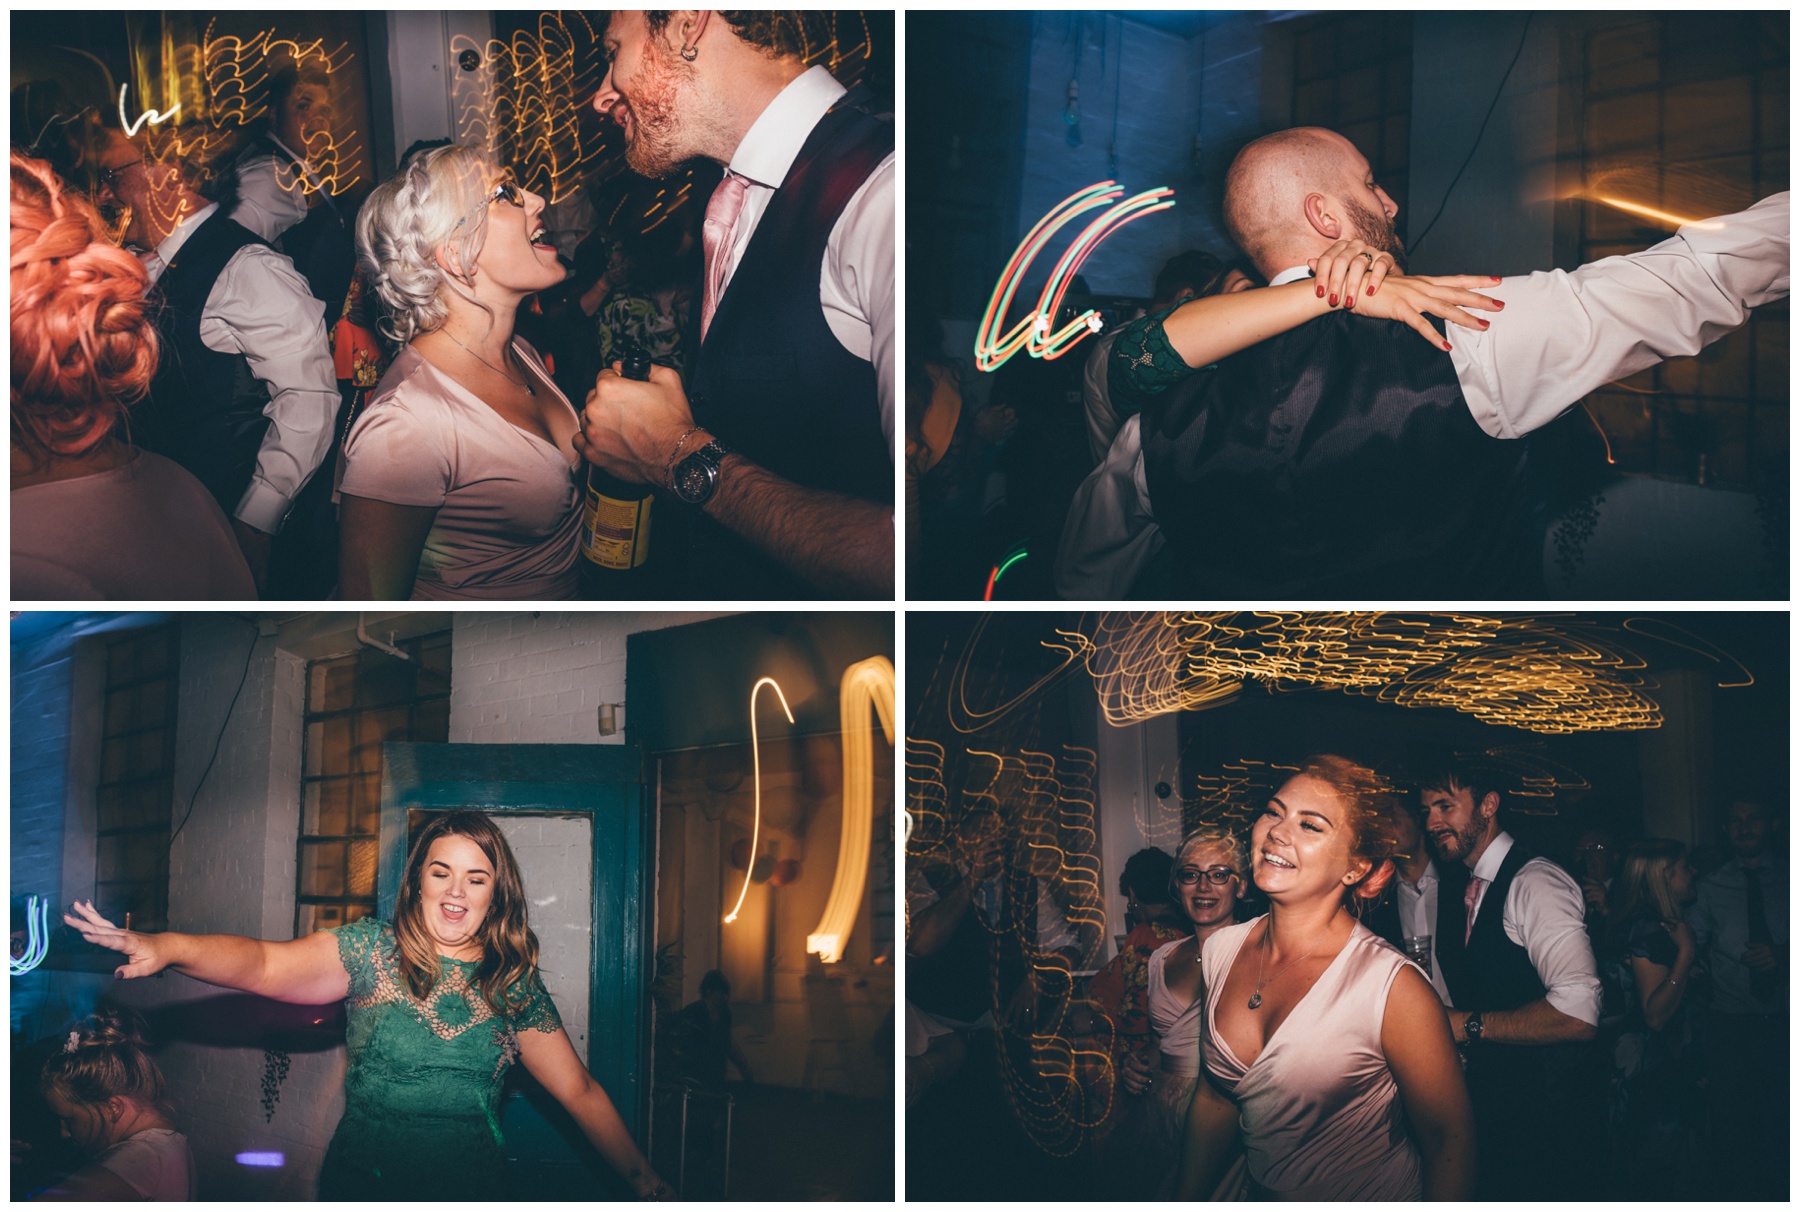 Guests dance at The Hide, a cool, Urban wedding venue in Sheffield.